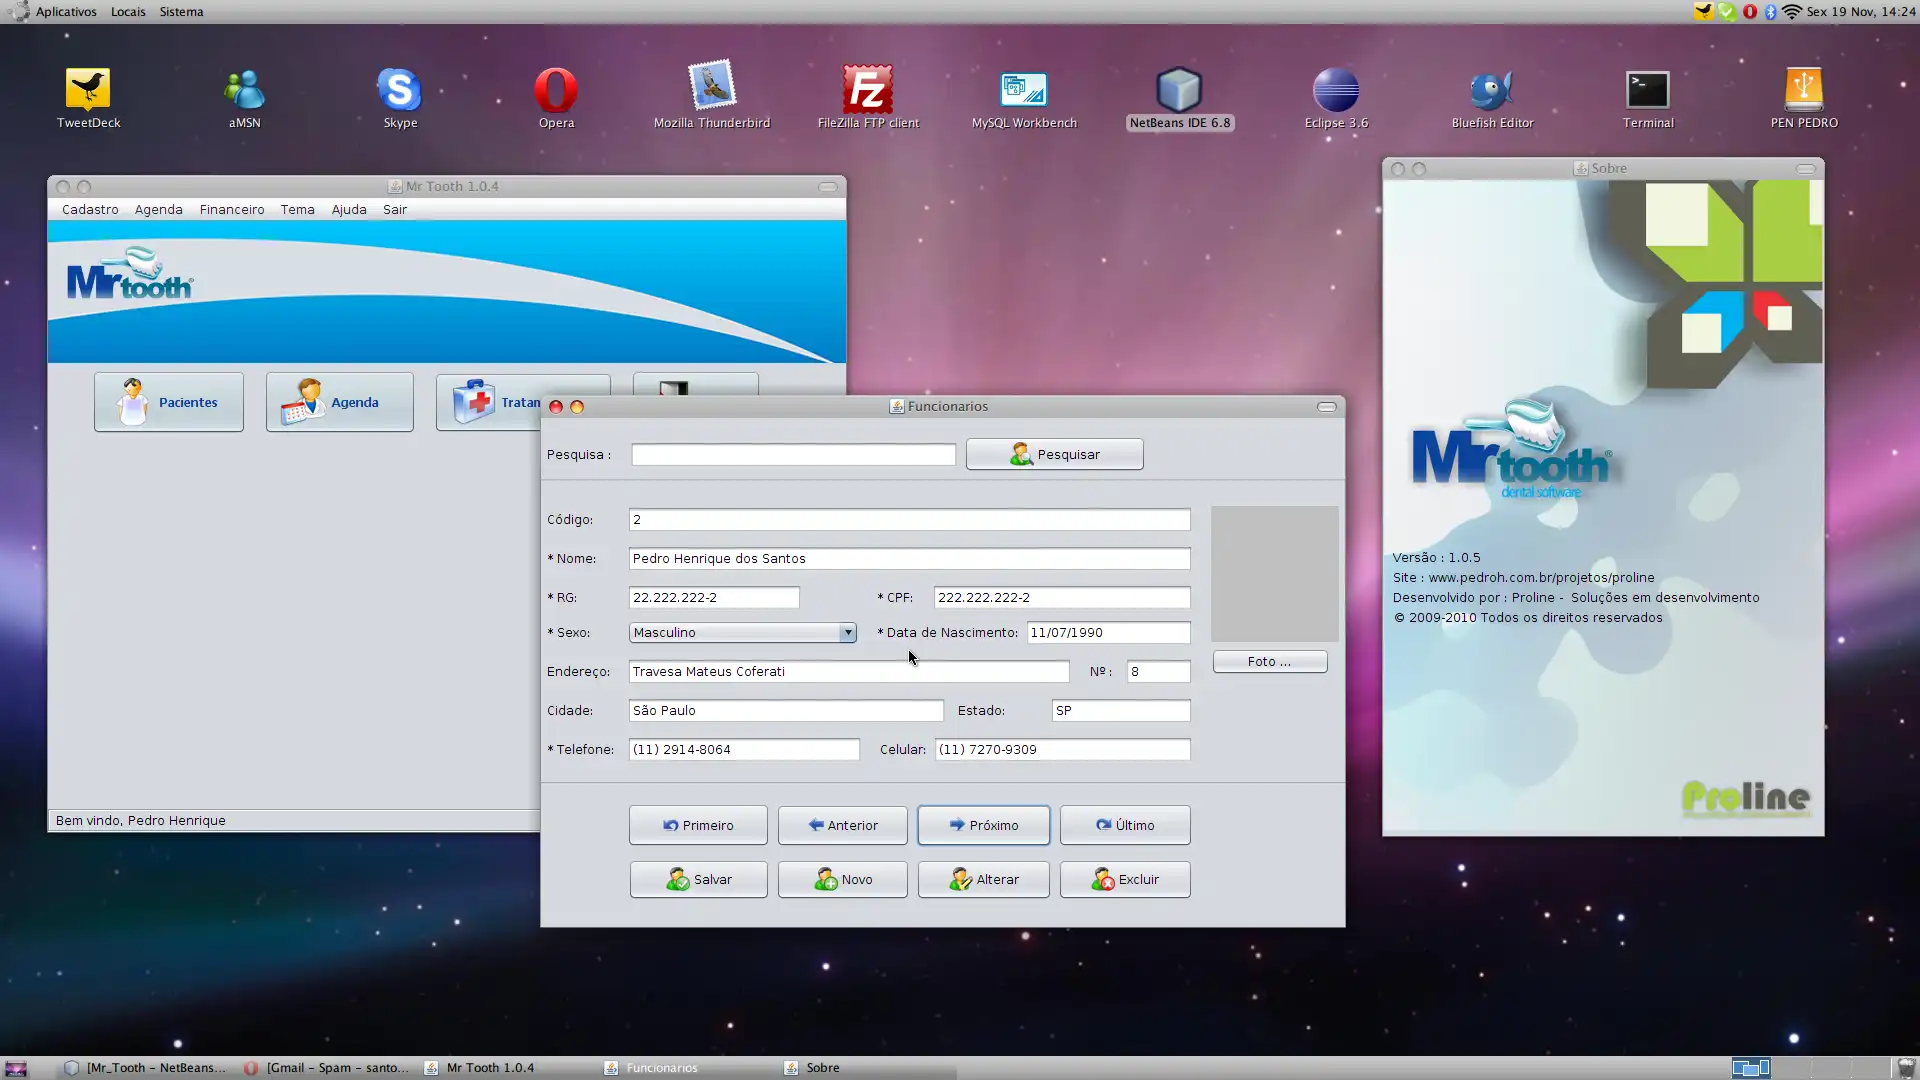 Download web tool or web app Mr Tooth Dental Software